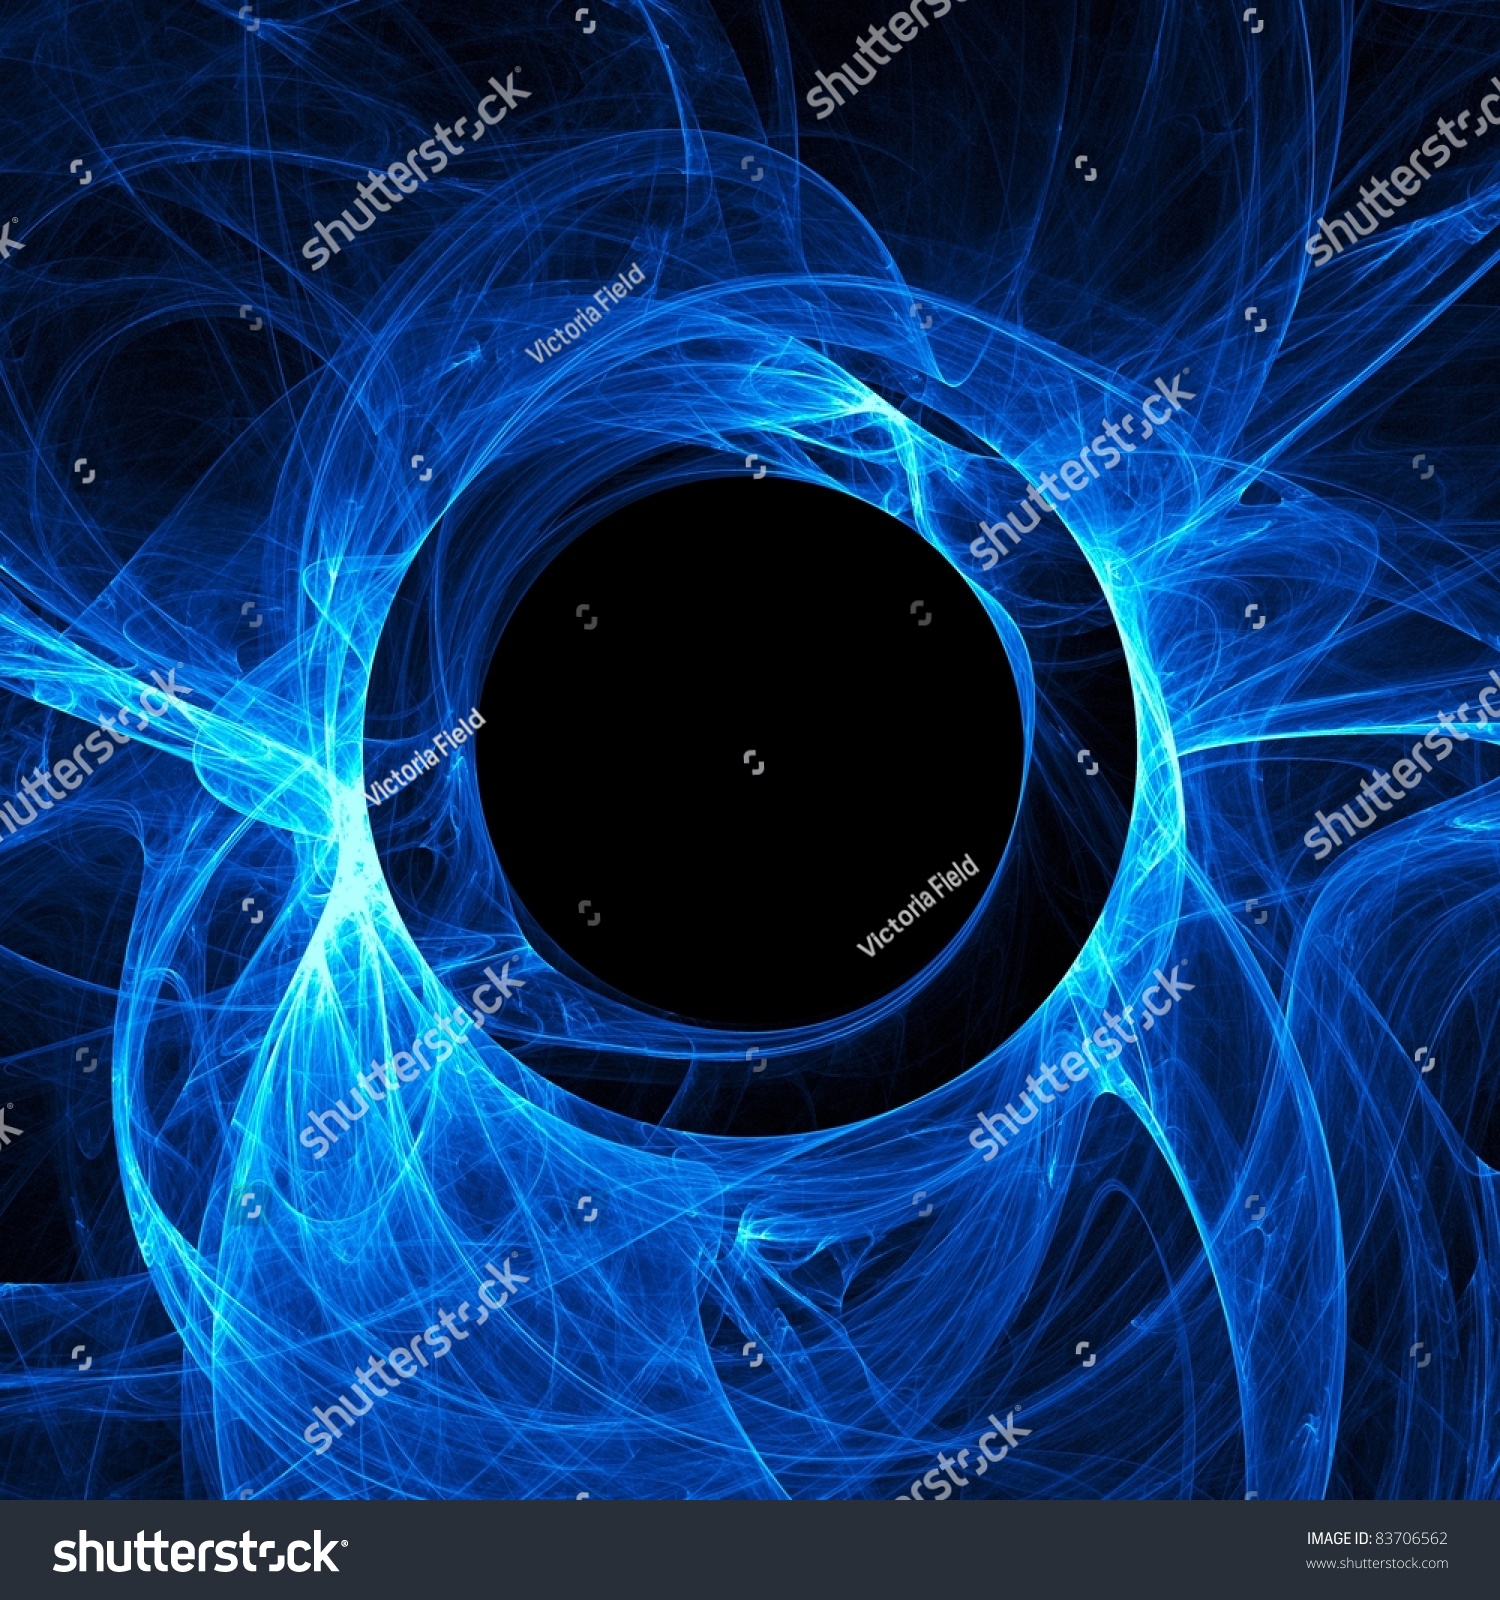 abstract fractal background #83706562